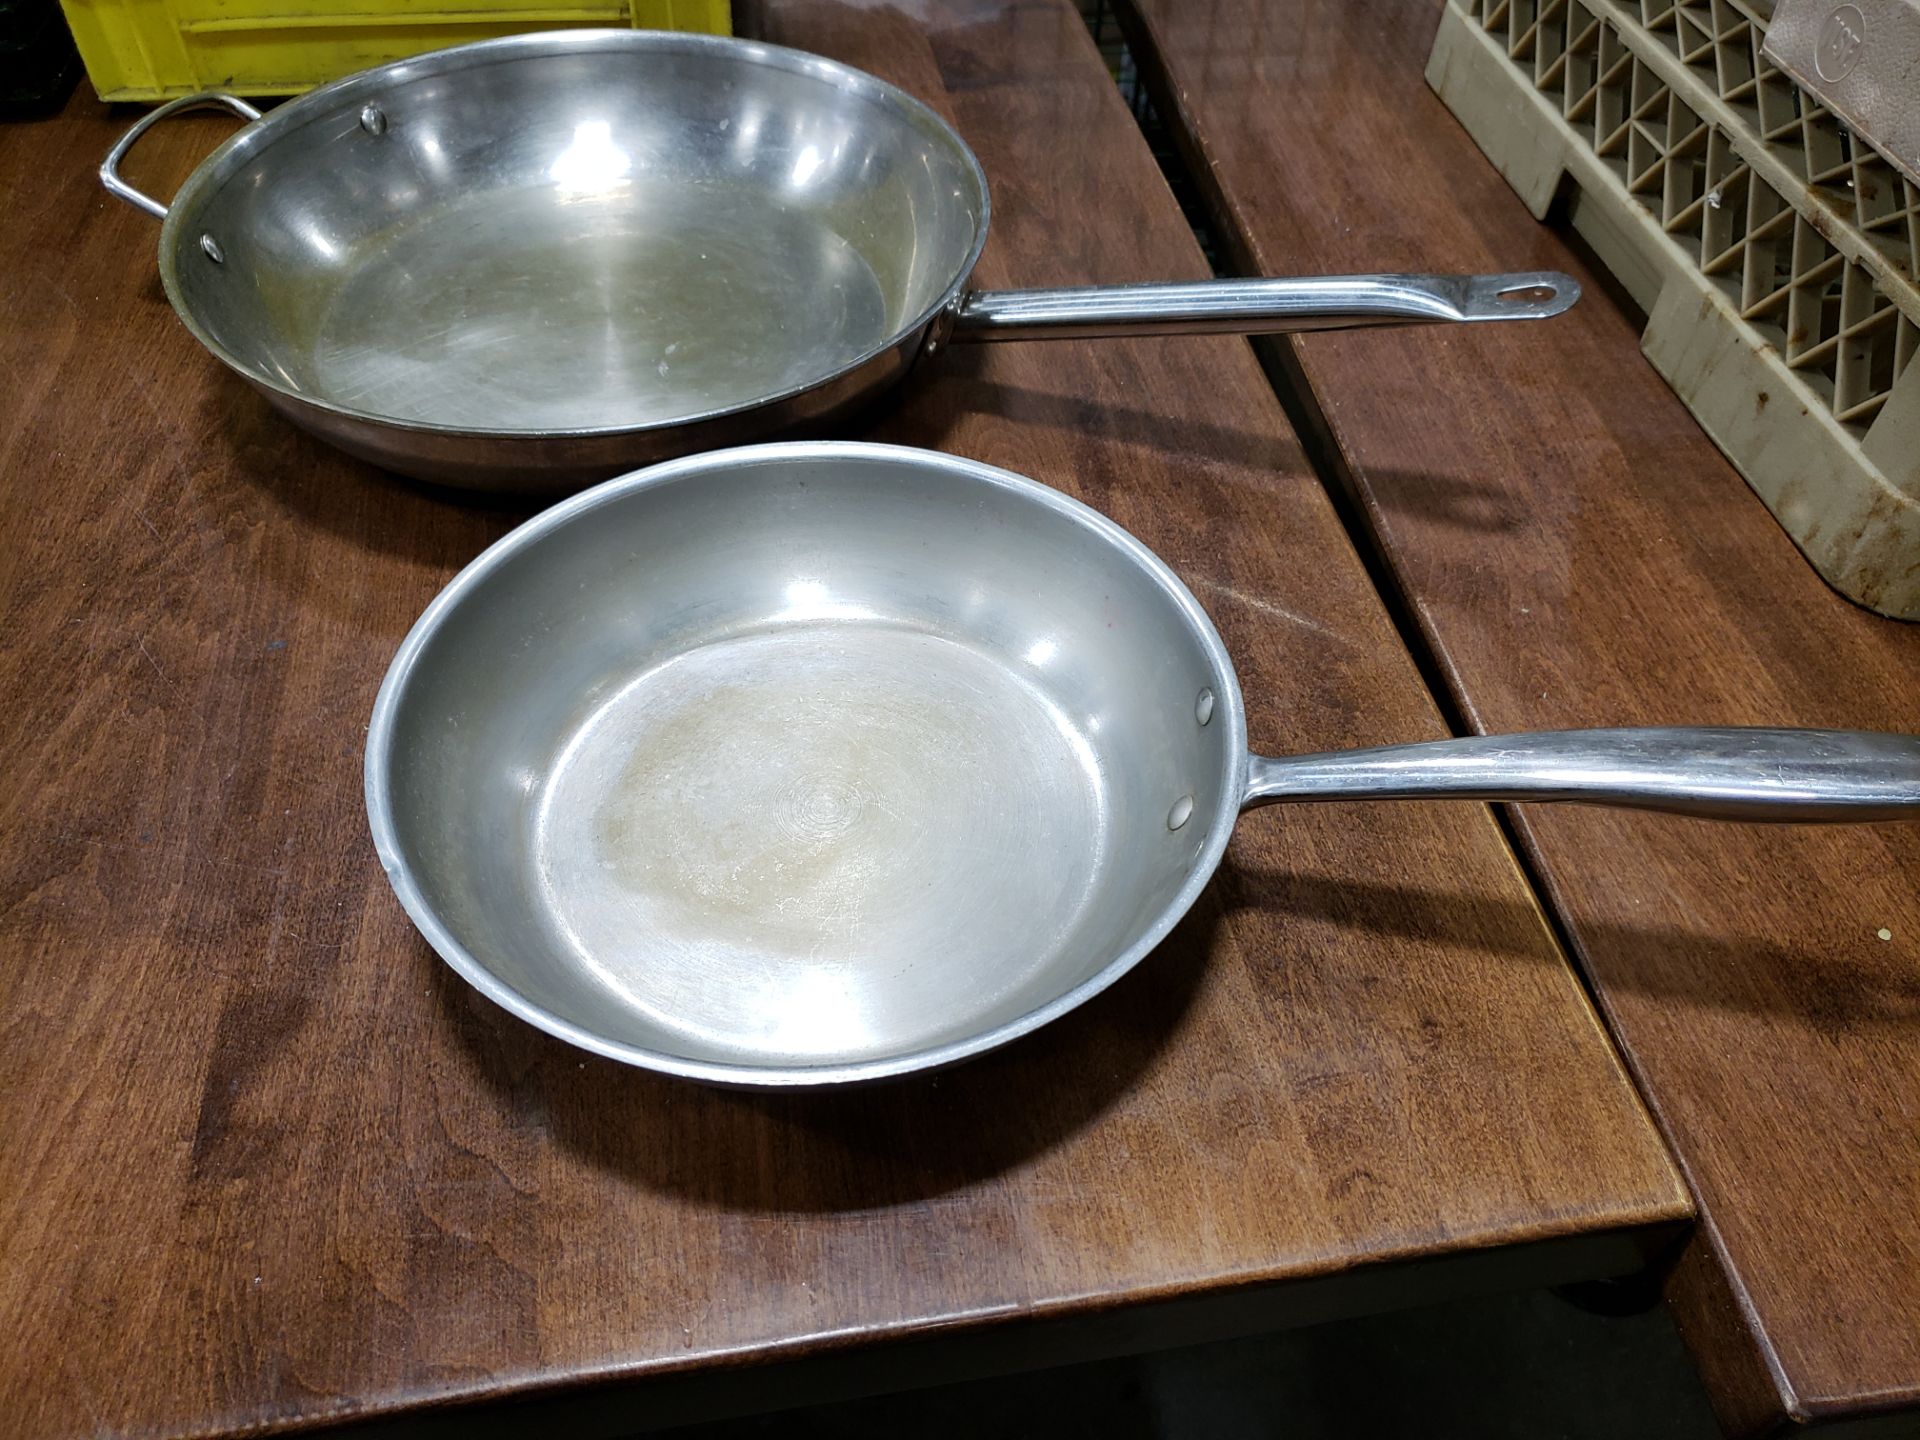 Stainless Steel Fry Pans 1 x 13" & 1 x 10" - Lot of 2